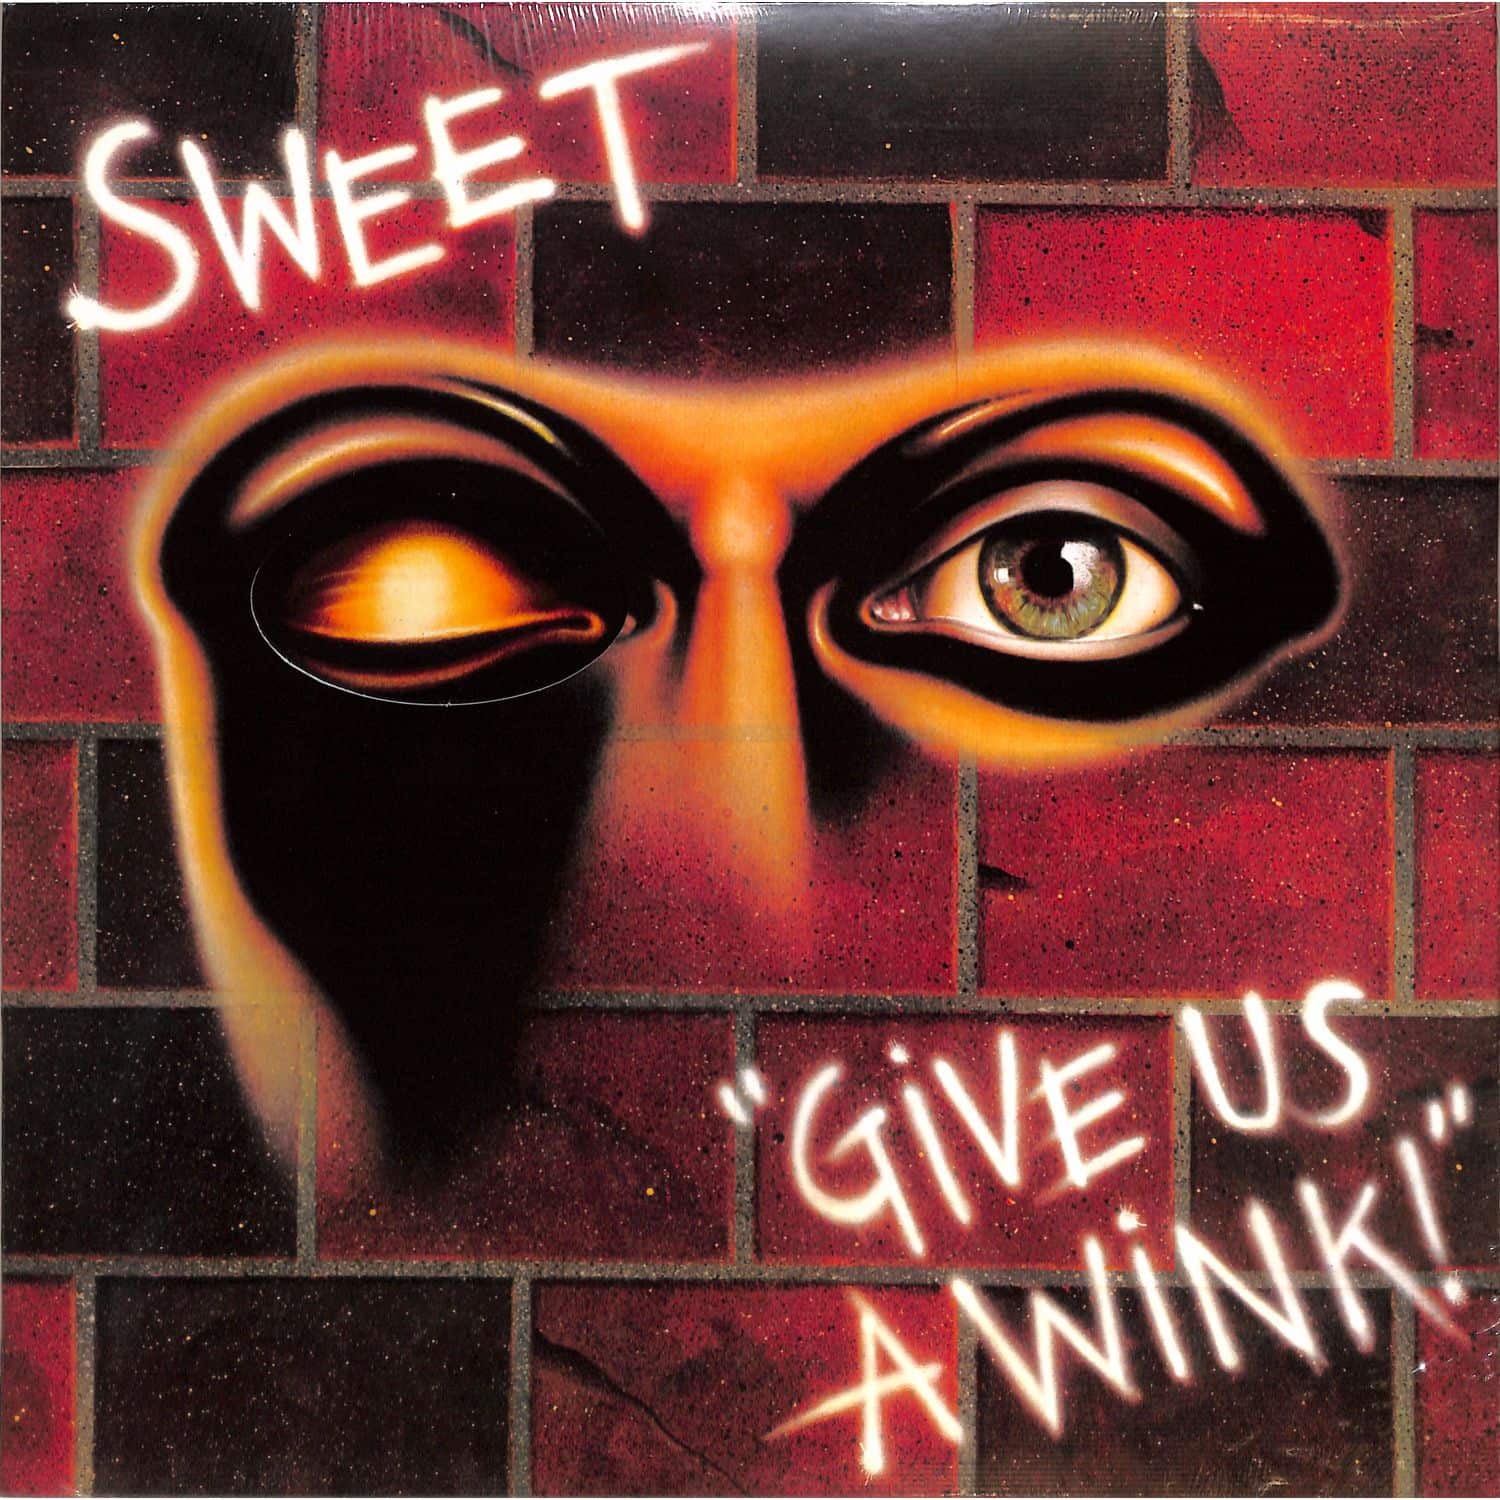 Sweet - GIVE US A WINK 